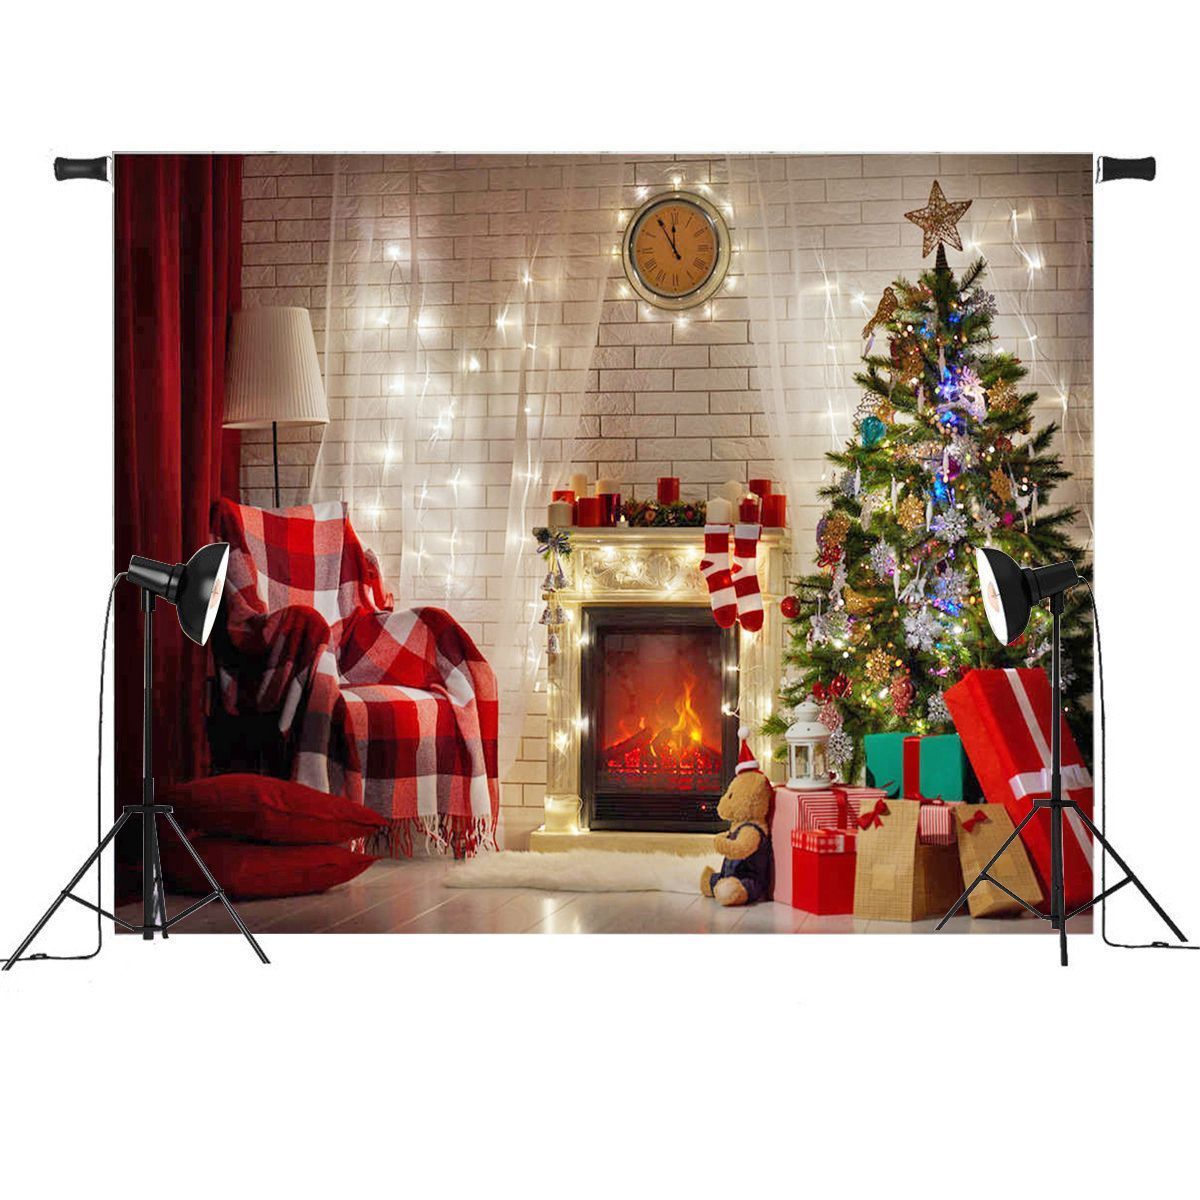 7x5FT-Red-Christmas-Tree-Gift-Chair-Fireplace-Photography-Backdrop-Studio-Prop-Background-1401424